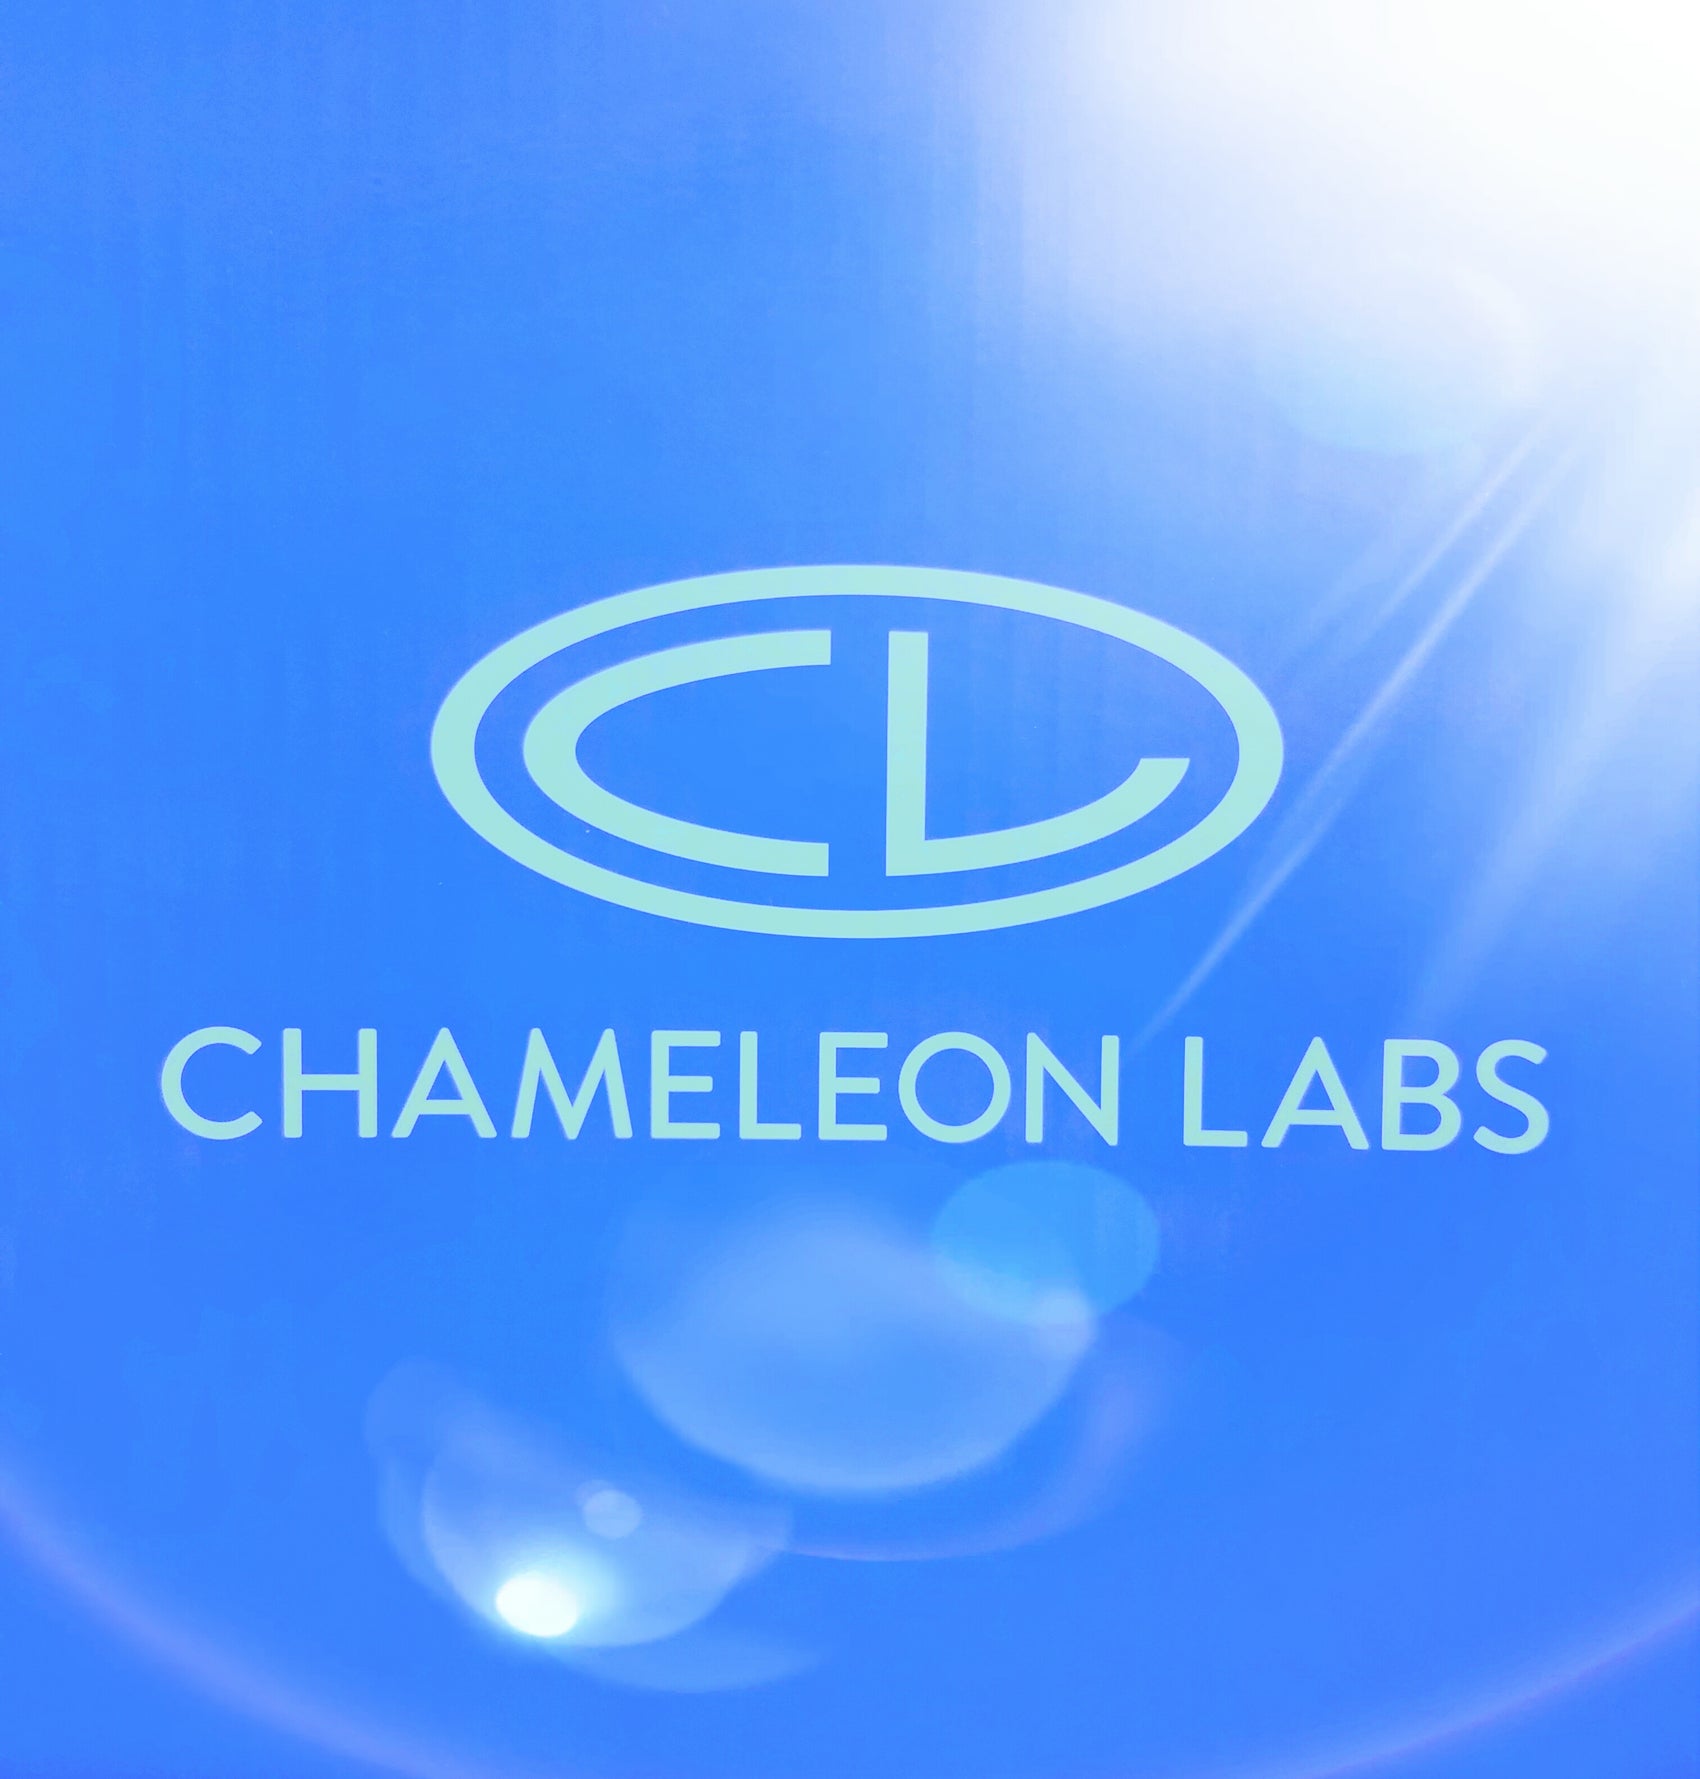 New Generation of Chameleon Labs Gear